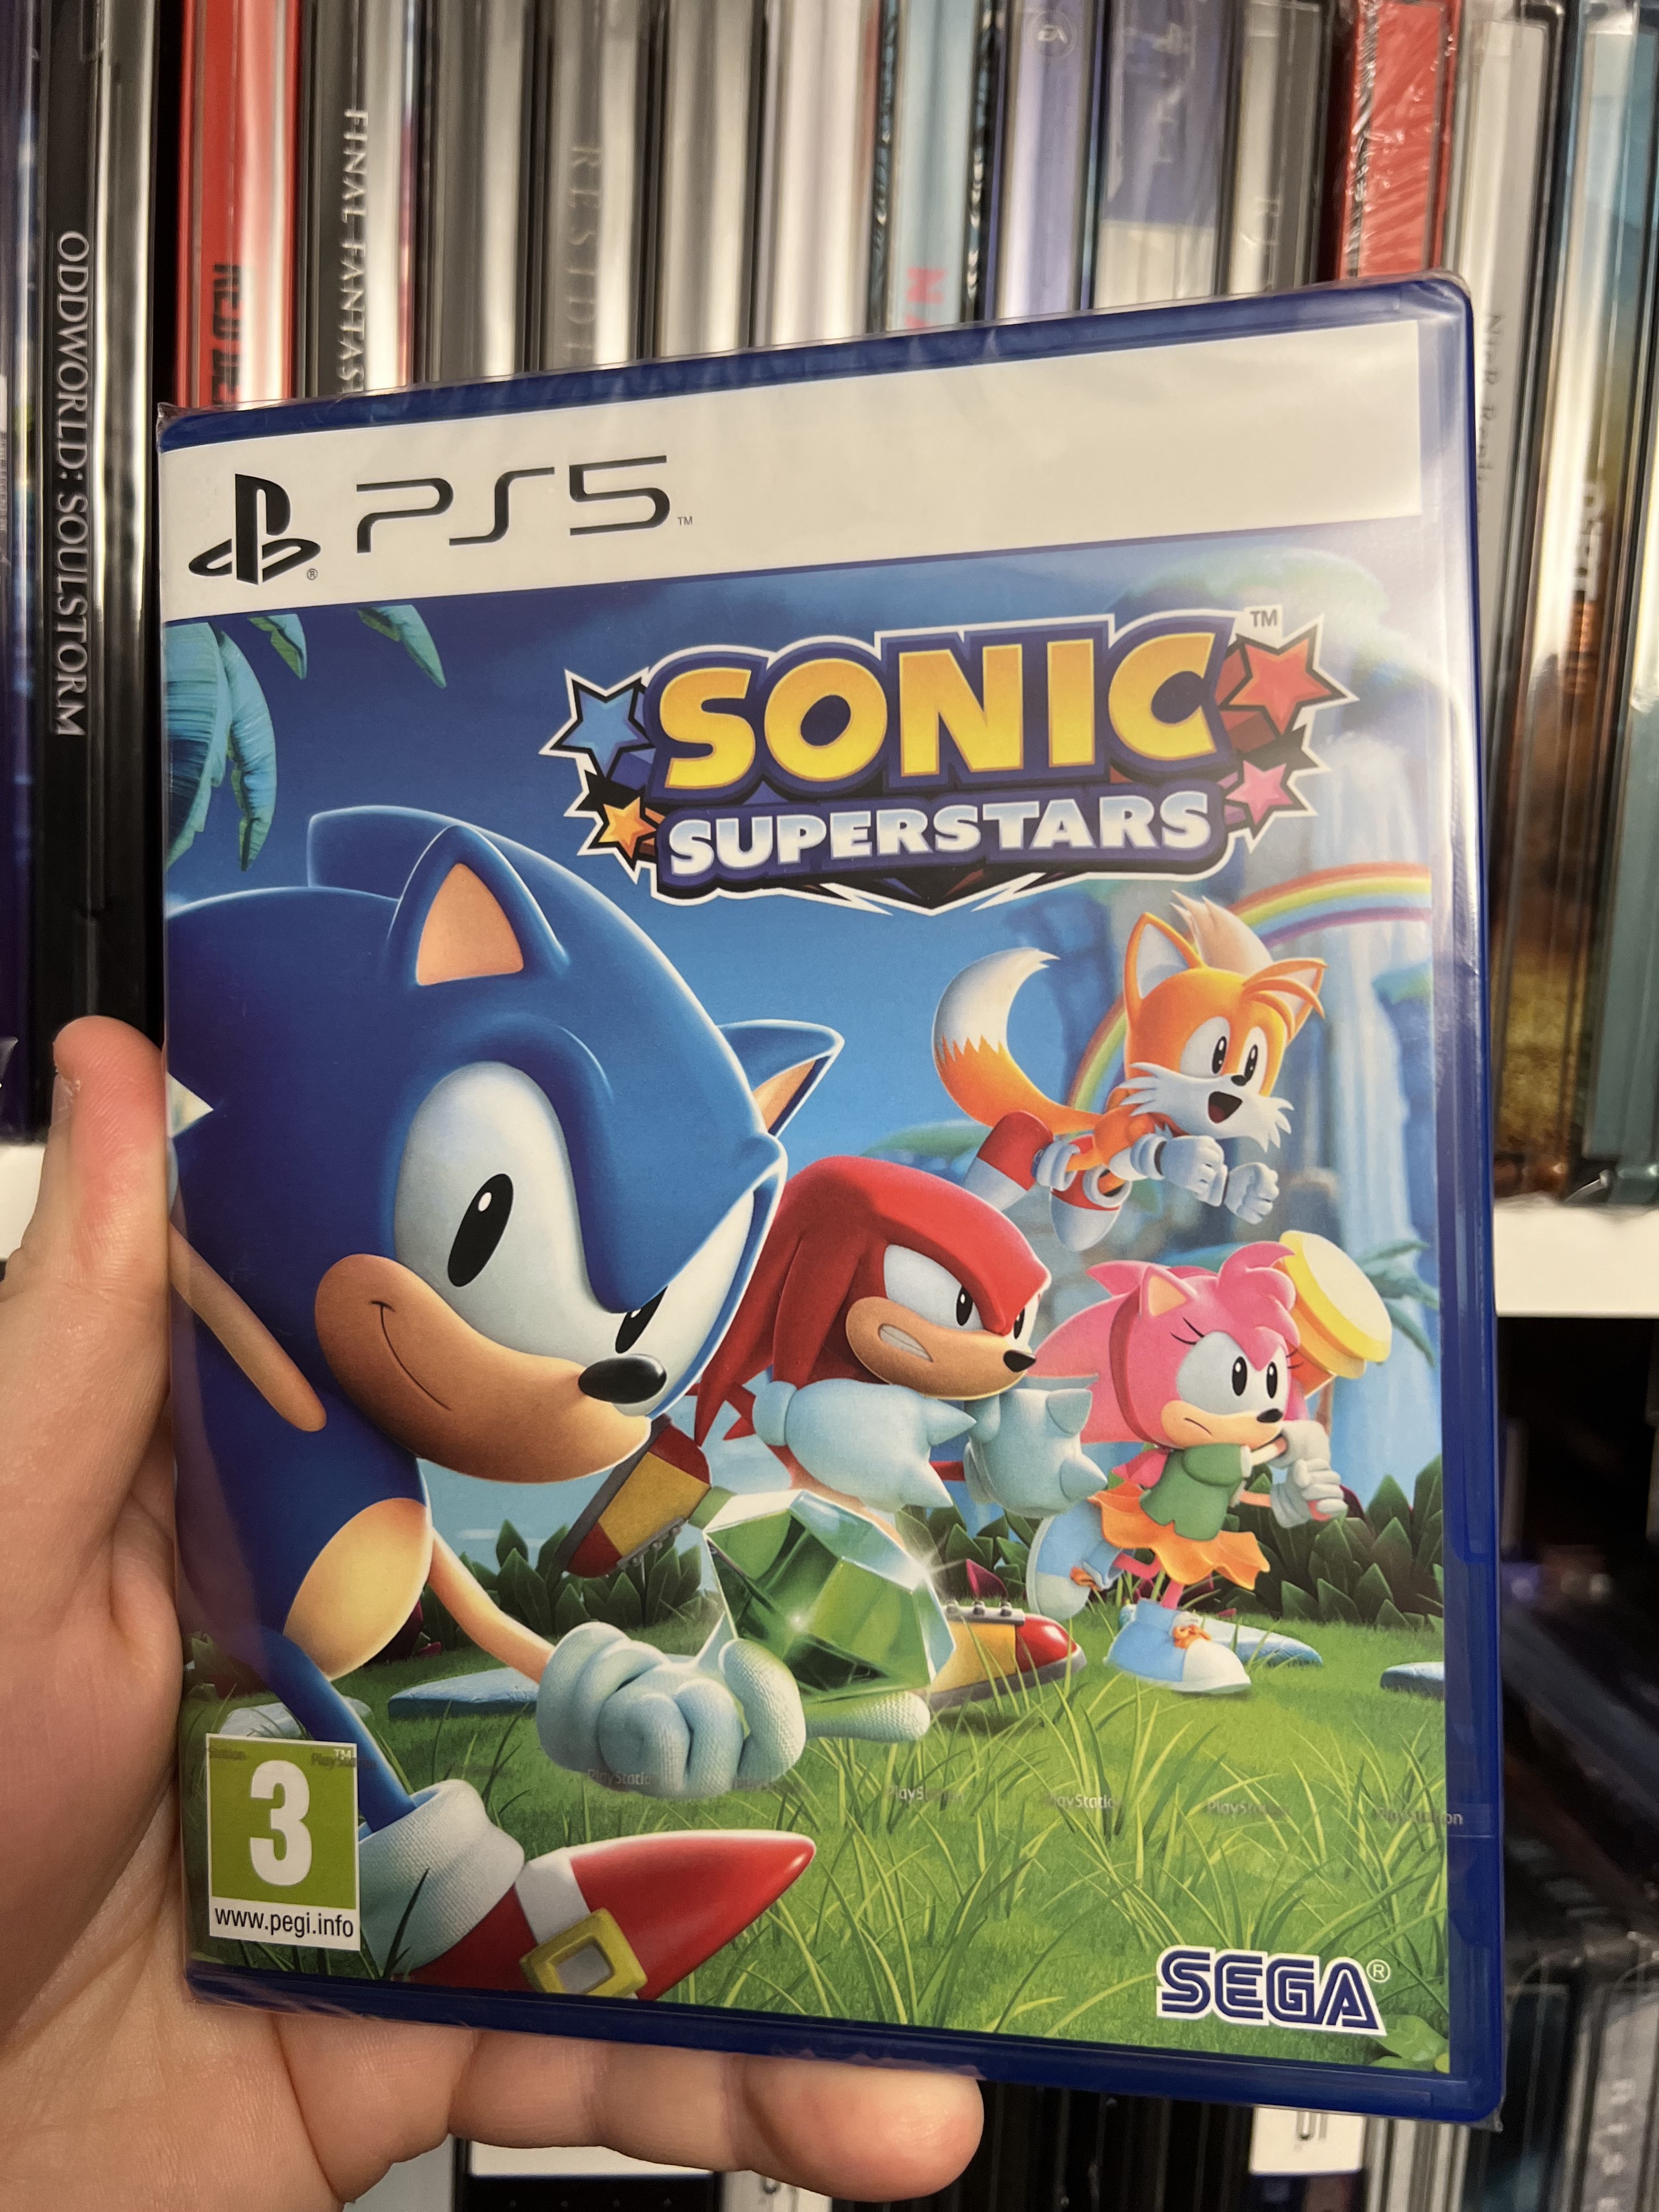 Sonic Superstars (Switch, PS5, PS4, Xbox) à 29,99€